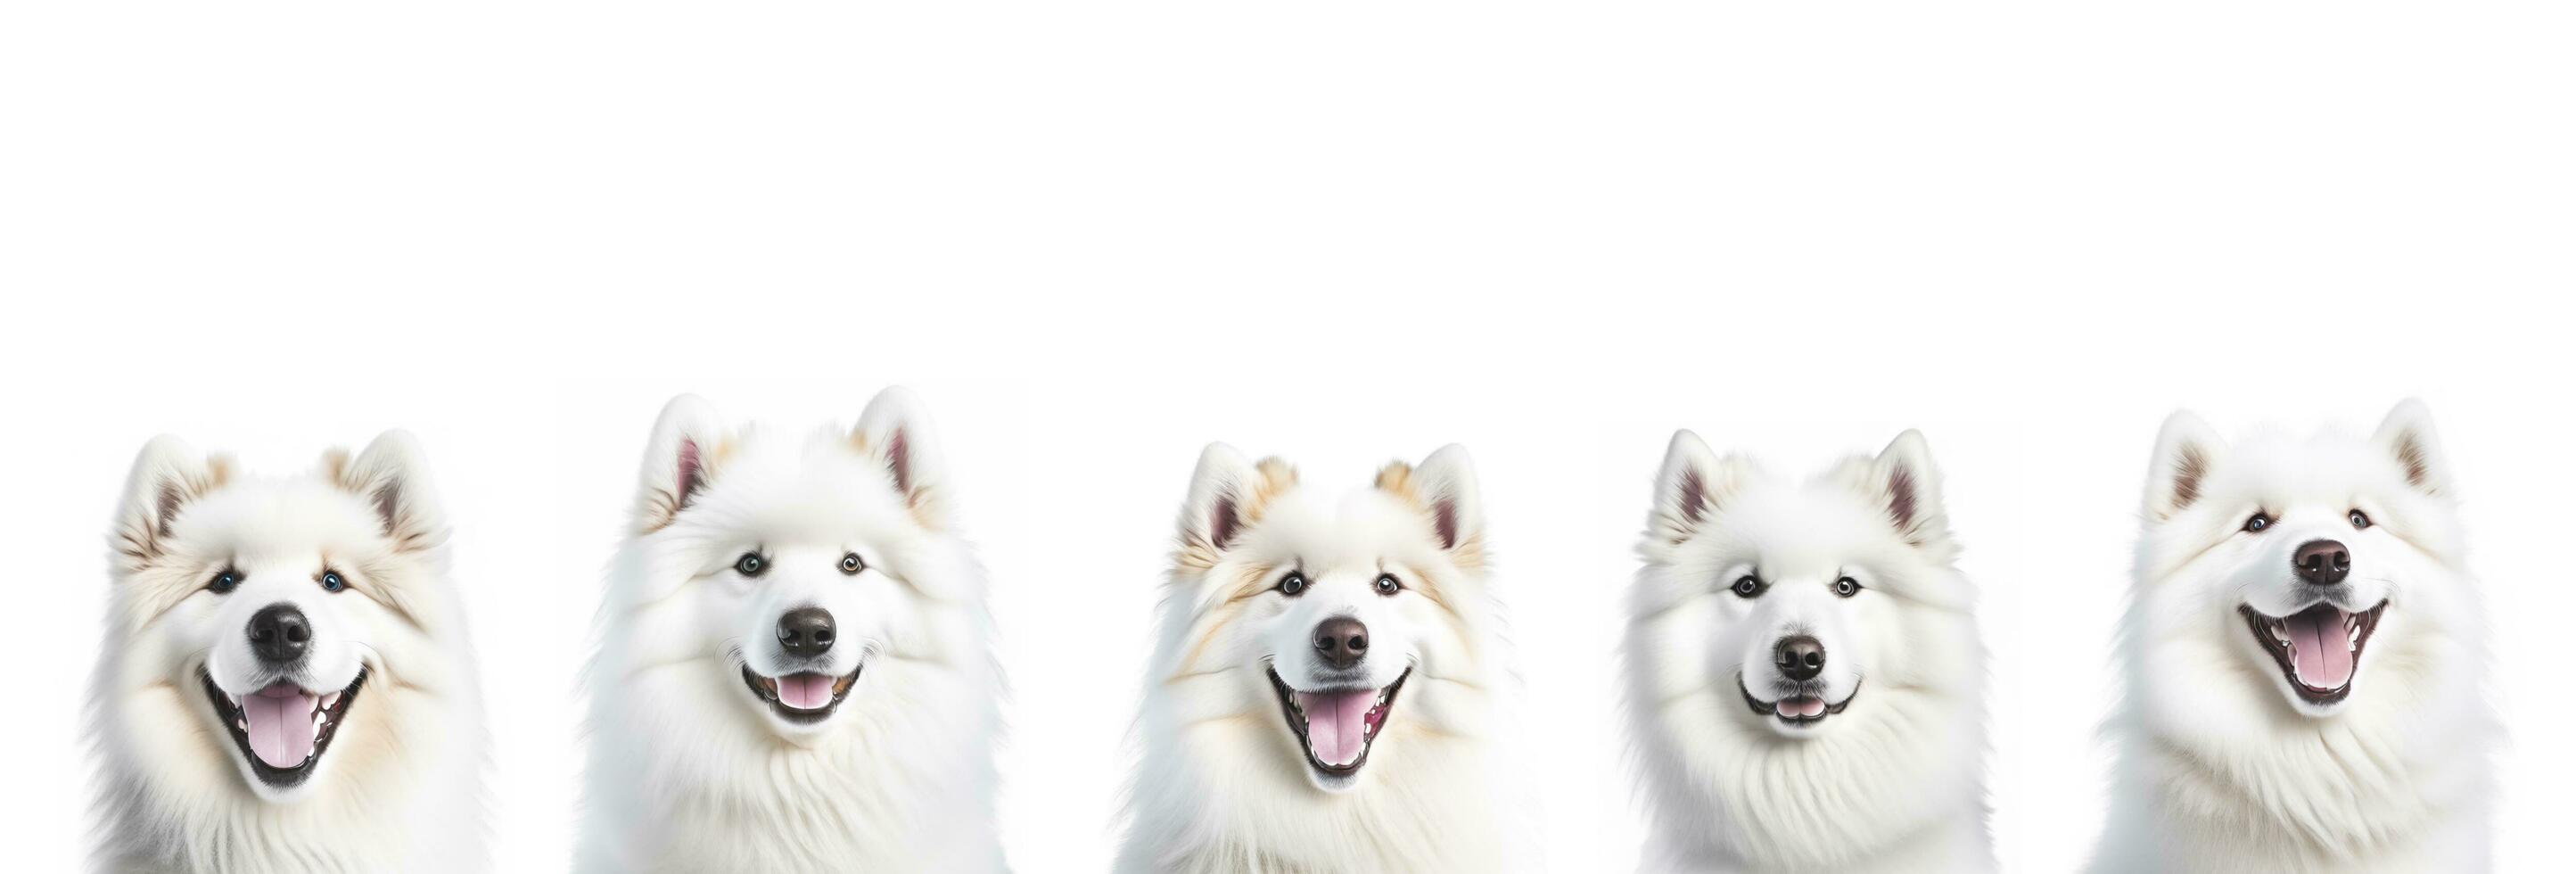 Collage close-up portrait group of young cute white happy smiling Samoyed dog head on white background banner. AI generated photo